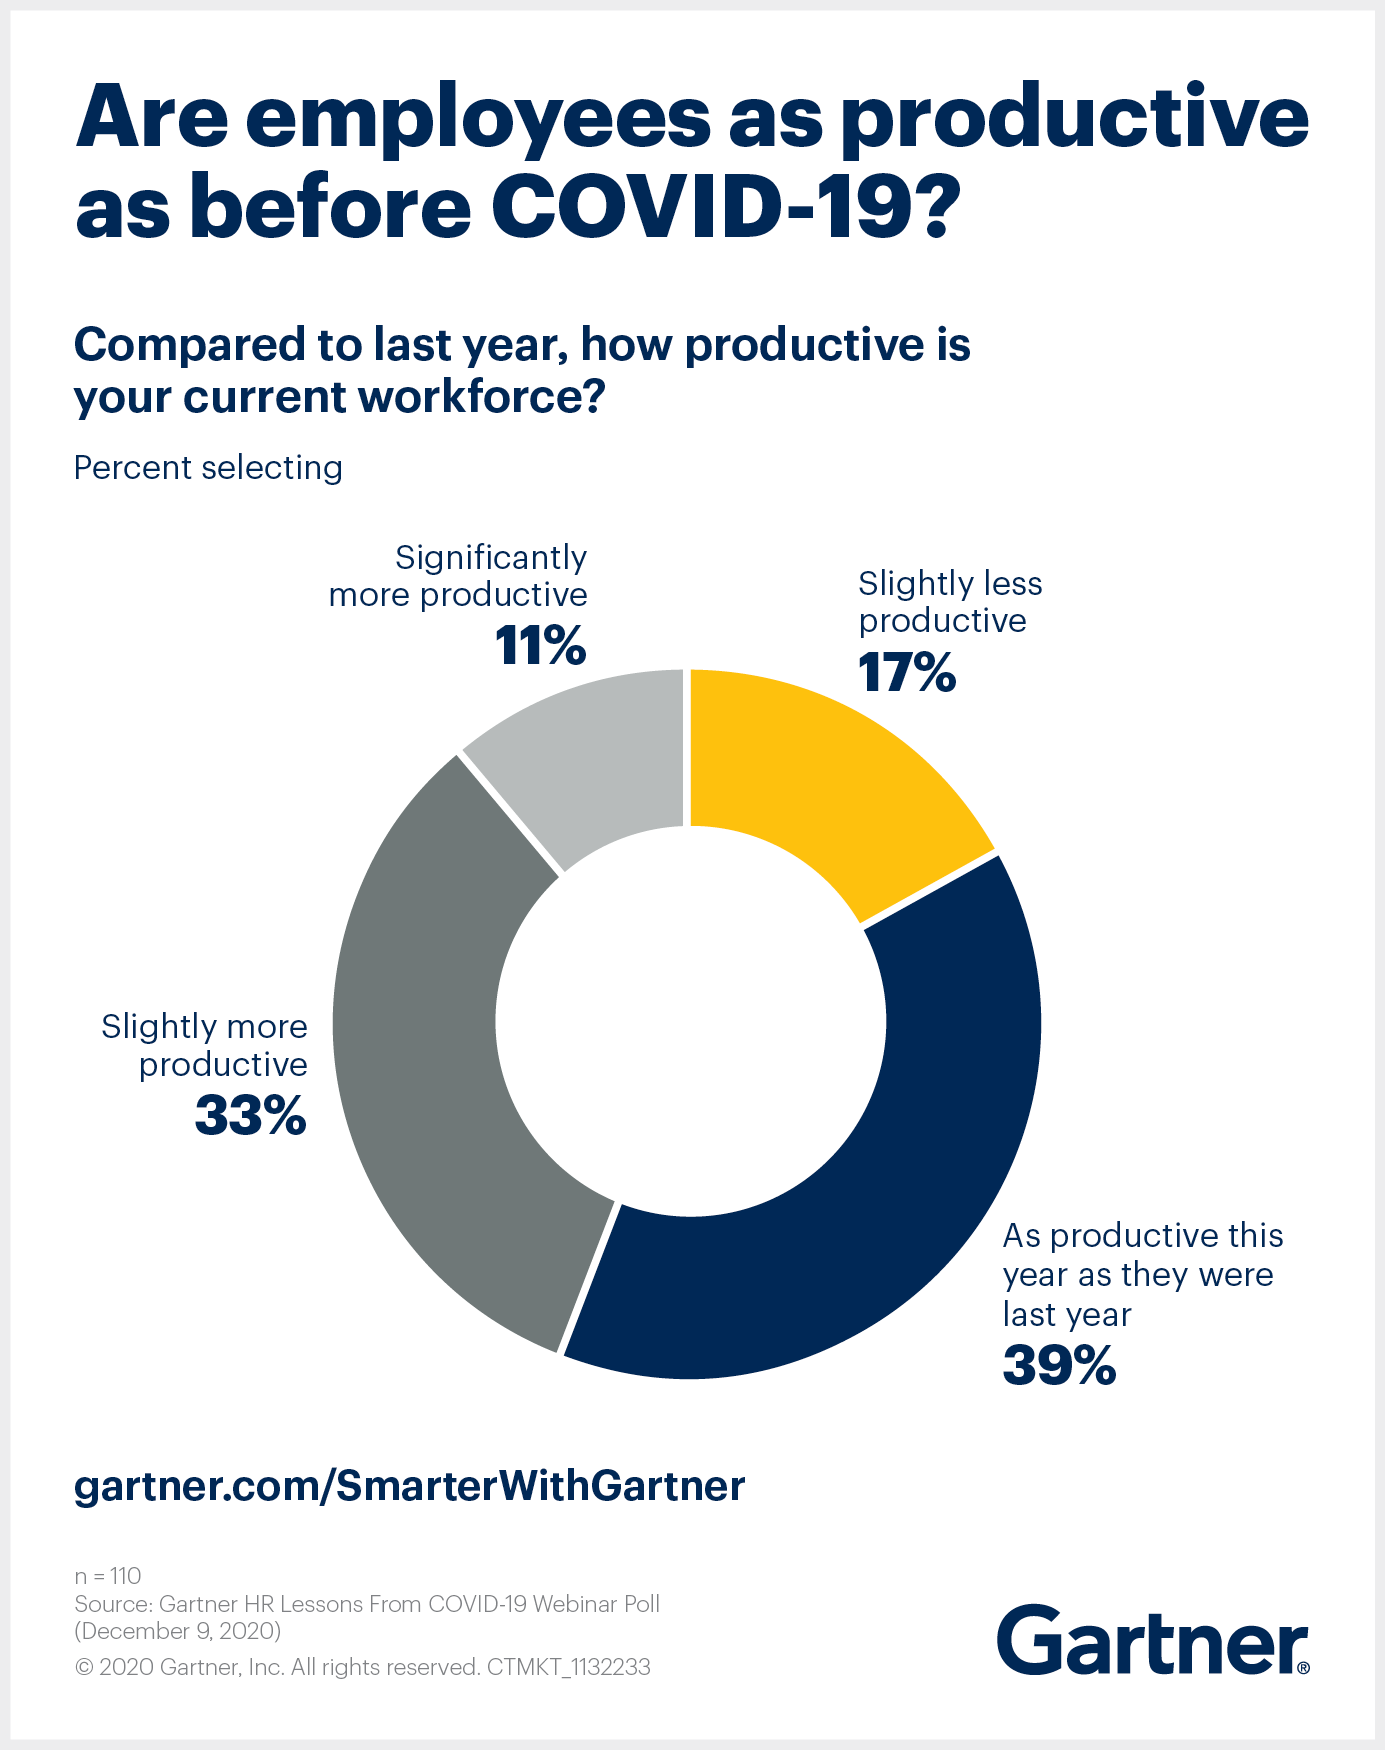 Gartner asks whether employees are as productive as before COVID-19